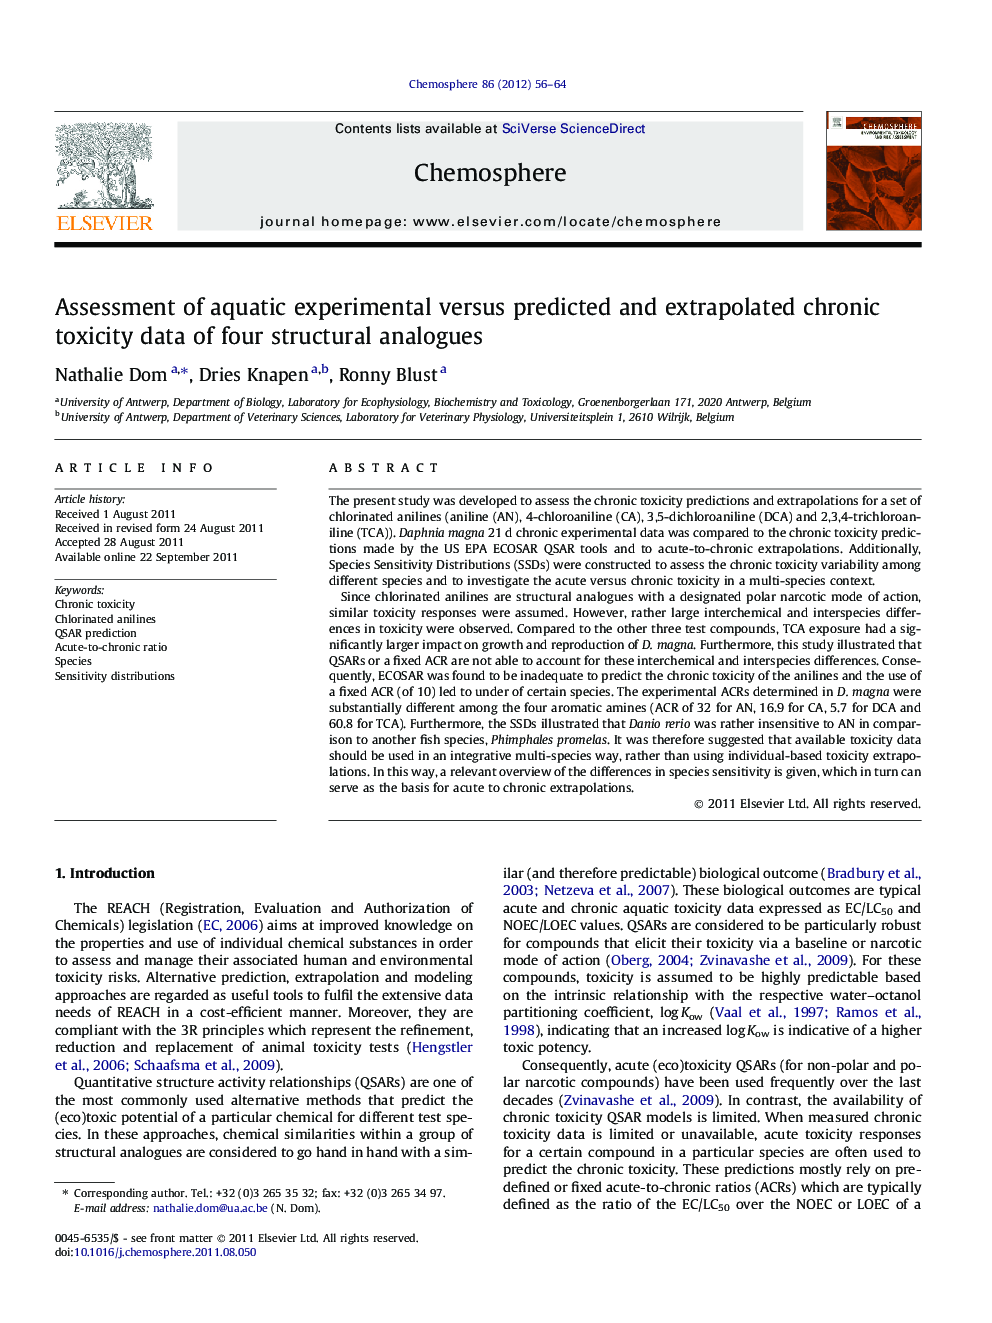 Assessment of aquatic experimental versus predicted and extrapolated chronic toxicity data of four structural analogues